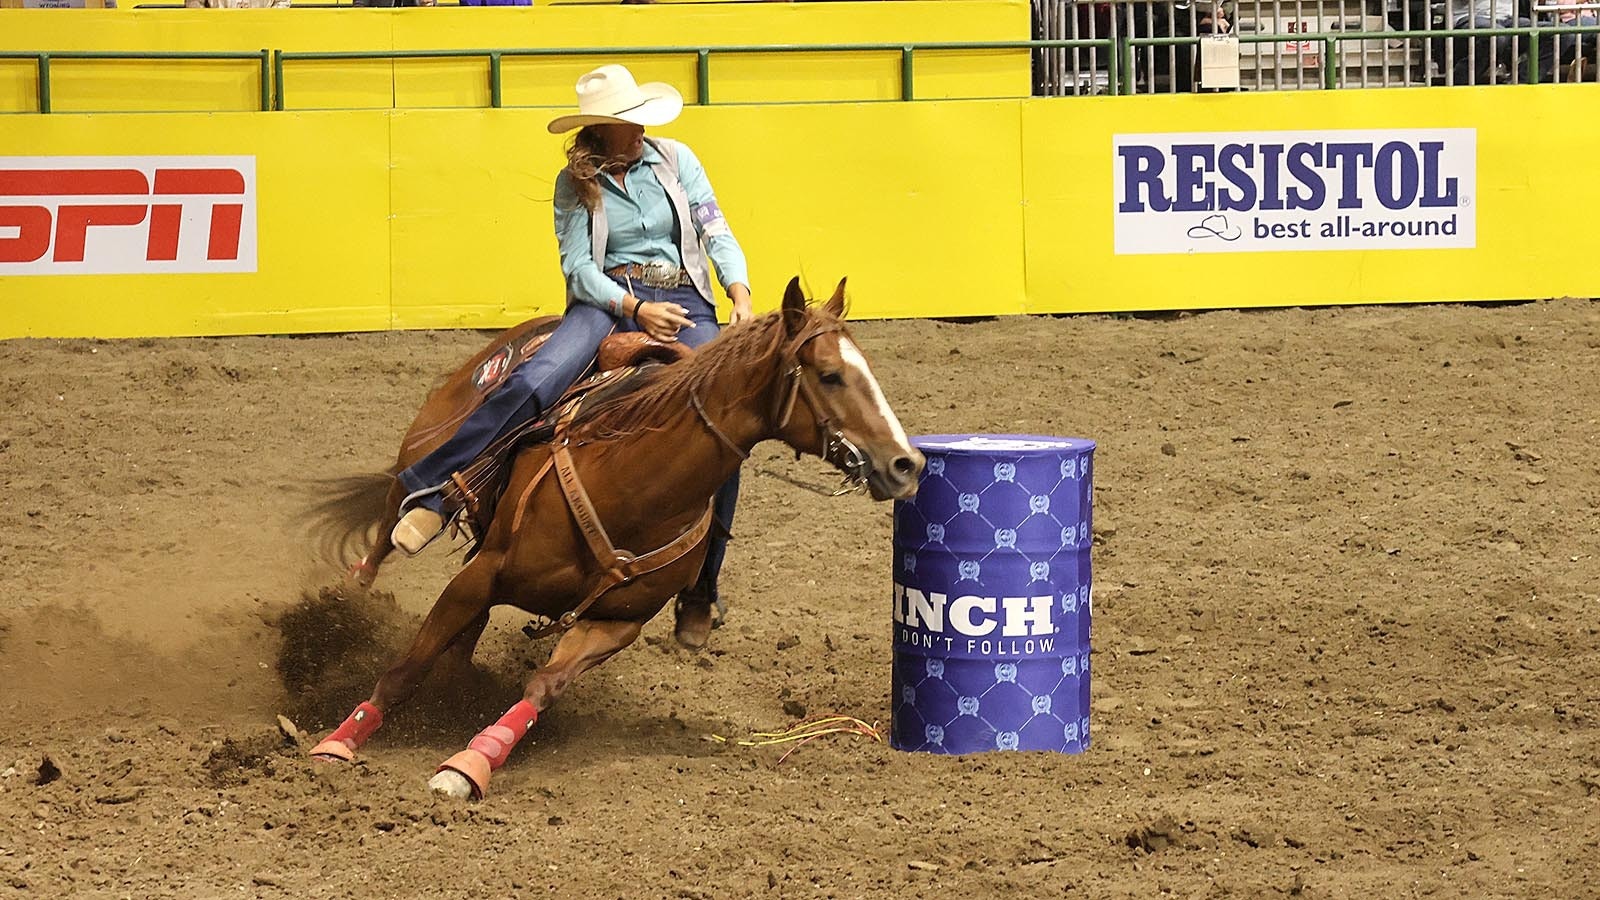 Haiden Thompson and Turbo tackle a barrel and send dirt flying during the barrel racing competition on Wednesday.